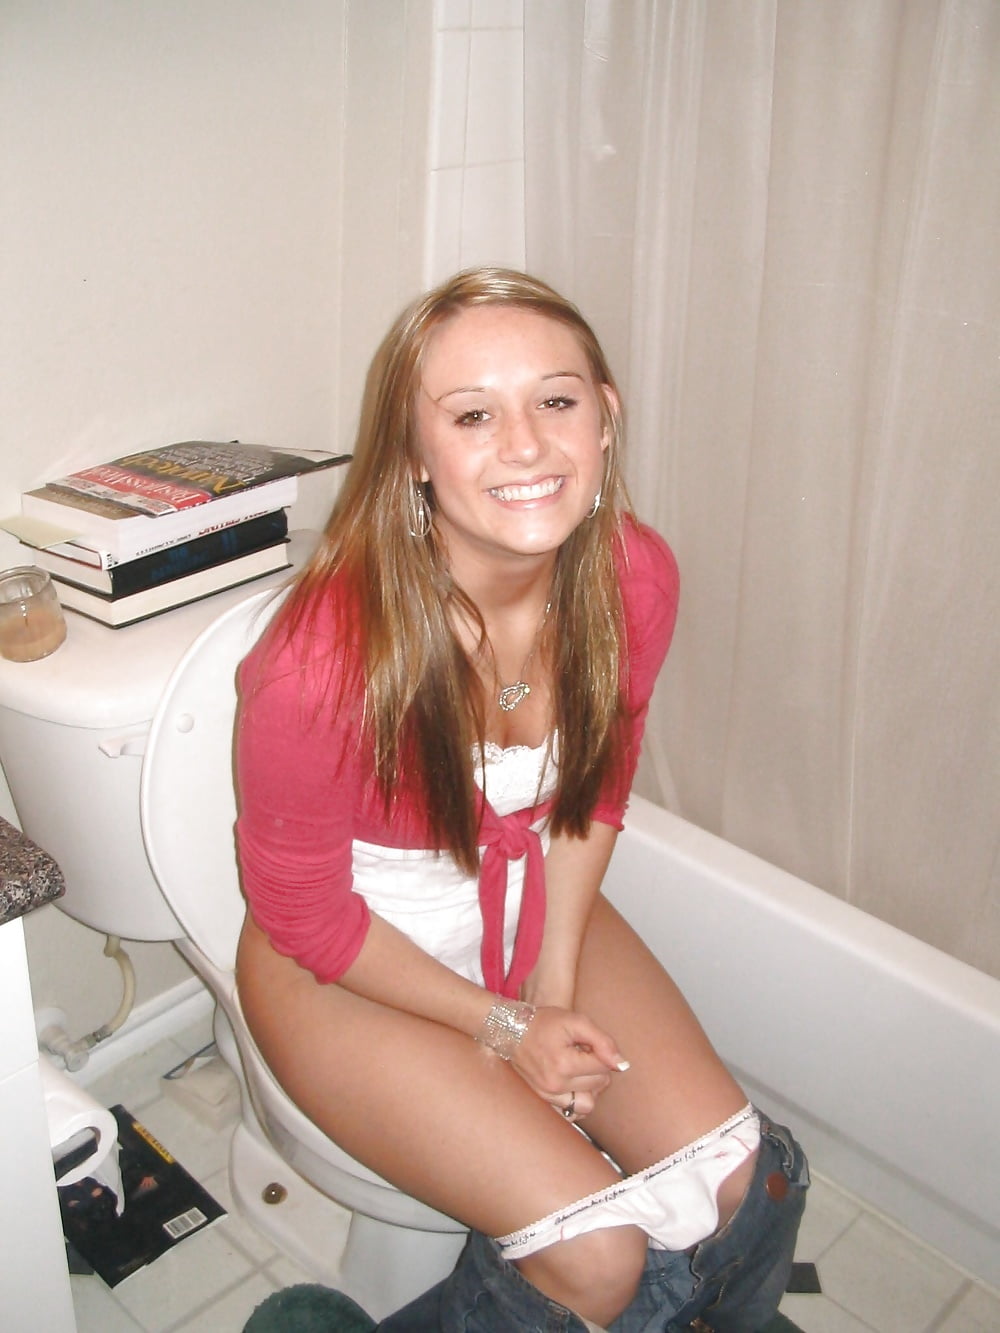 Toilet in teen photo — pic 8